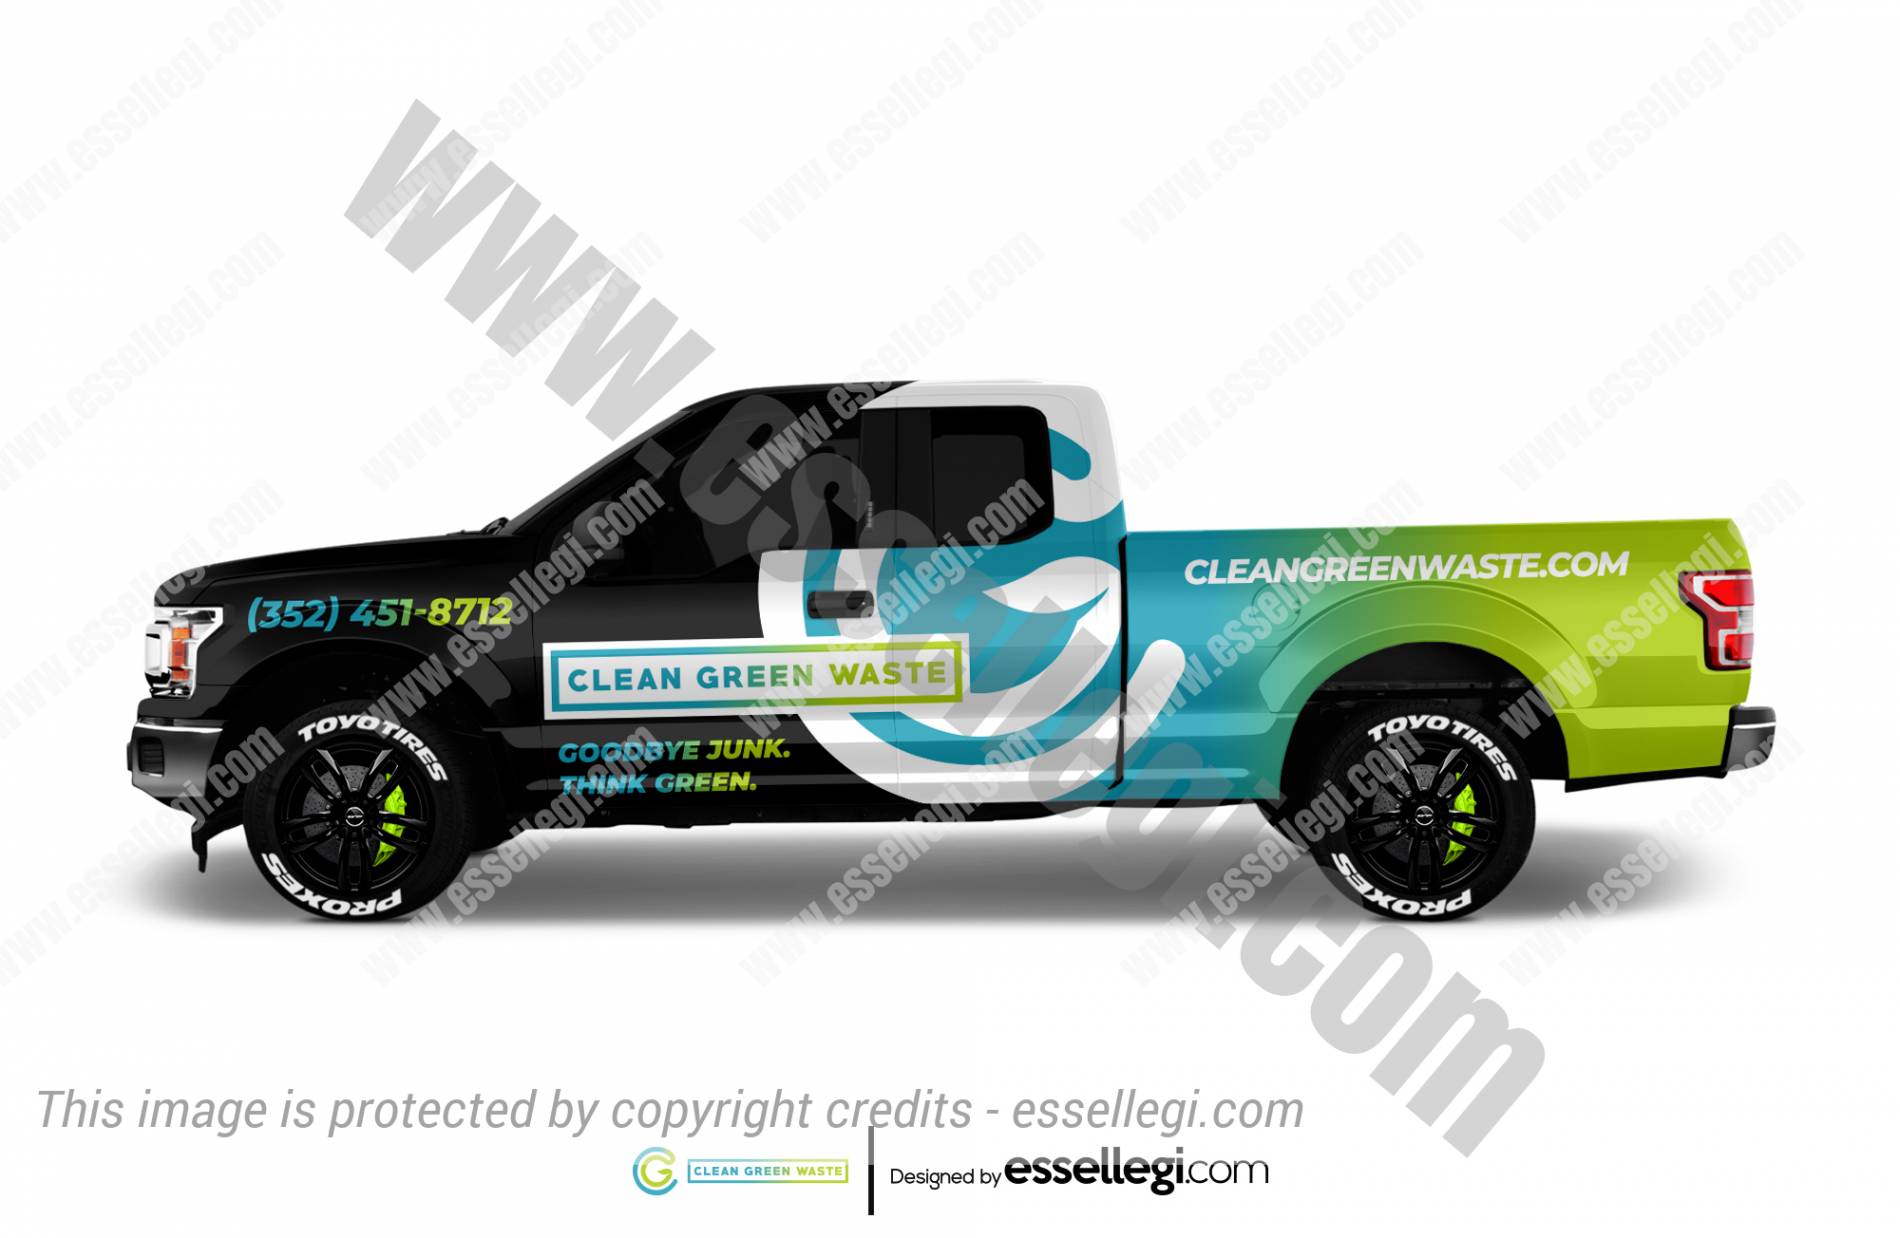 Ford F150 Wrap. Ford F150 | Truck Wrap Design by Essellegi. Ford Truck, Ford Trucks, Truck Wrap, Truck Wraps, Wrap Design, Vehicle Signage, Vehicle Wrap, Truck Signs, Vinyl Wrap, Truck Graphics, Vehicle Signs Vehicle Wraps, Vehicle Graphics, Truck Wrapping, Vehicle Wrapping Wrapped, Custom Wraps, Custom Graphics, Vinyl Wraps, Full Wrap Wrap Advertising, Commercial Wraps, Custom Design by Essellegi.